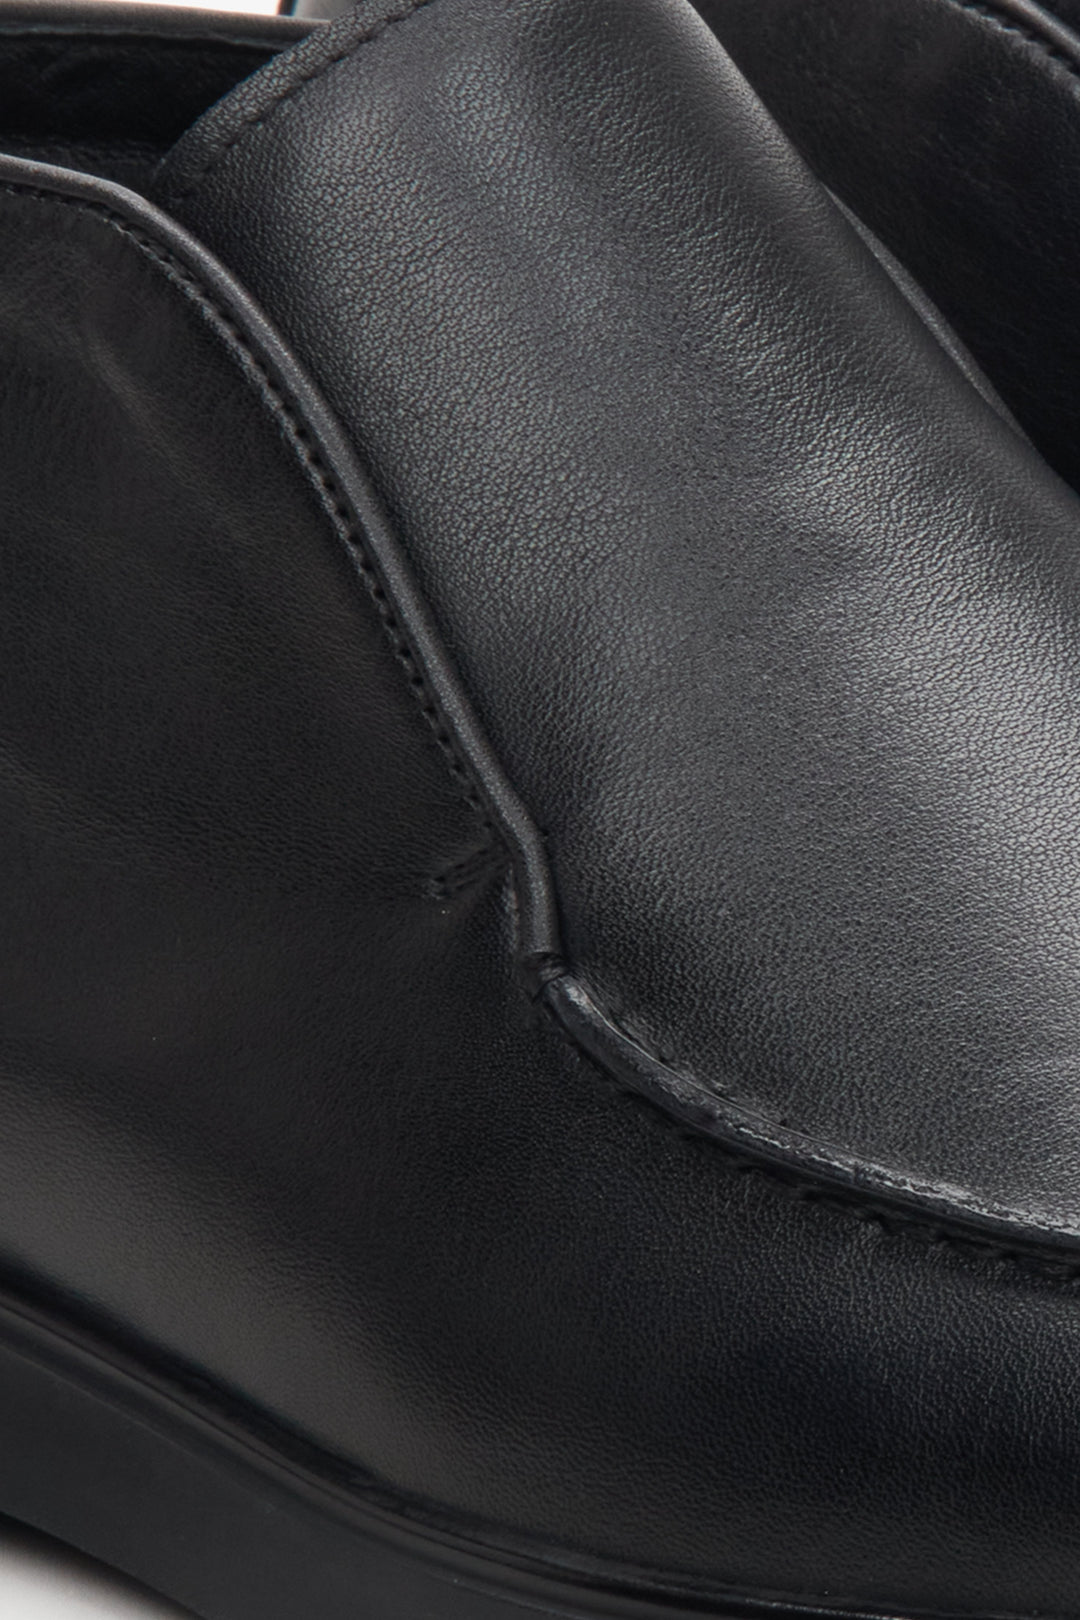 Men's black boots made of genuine leather in black color - close-up on the toe of the shoe.